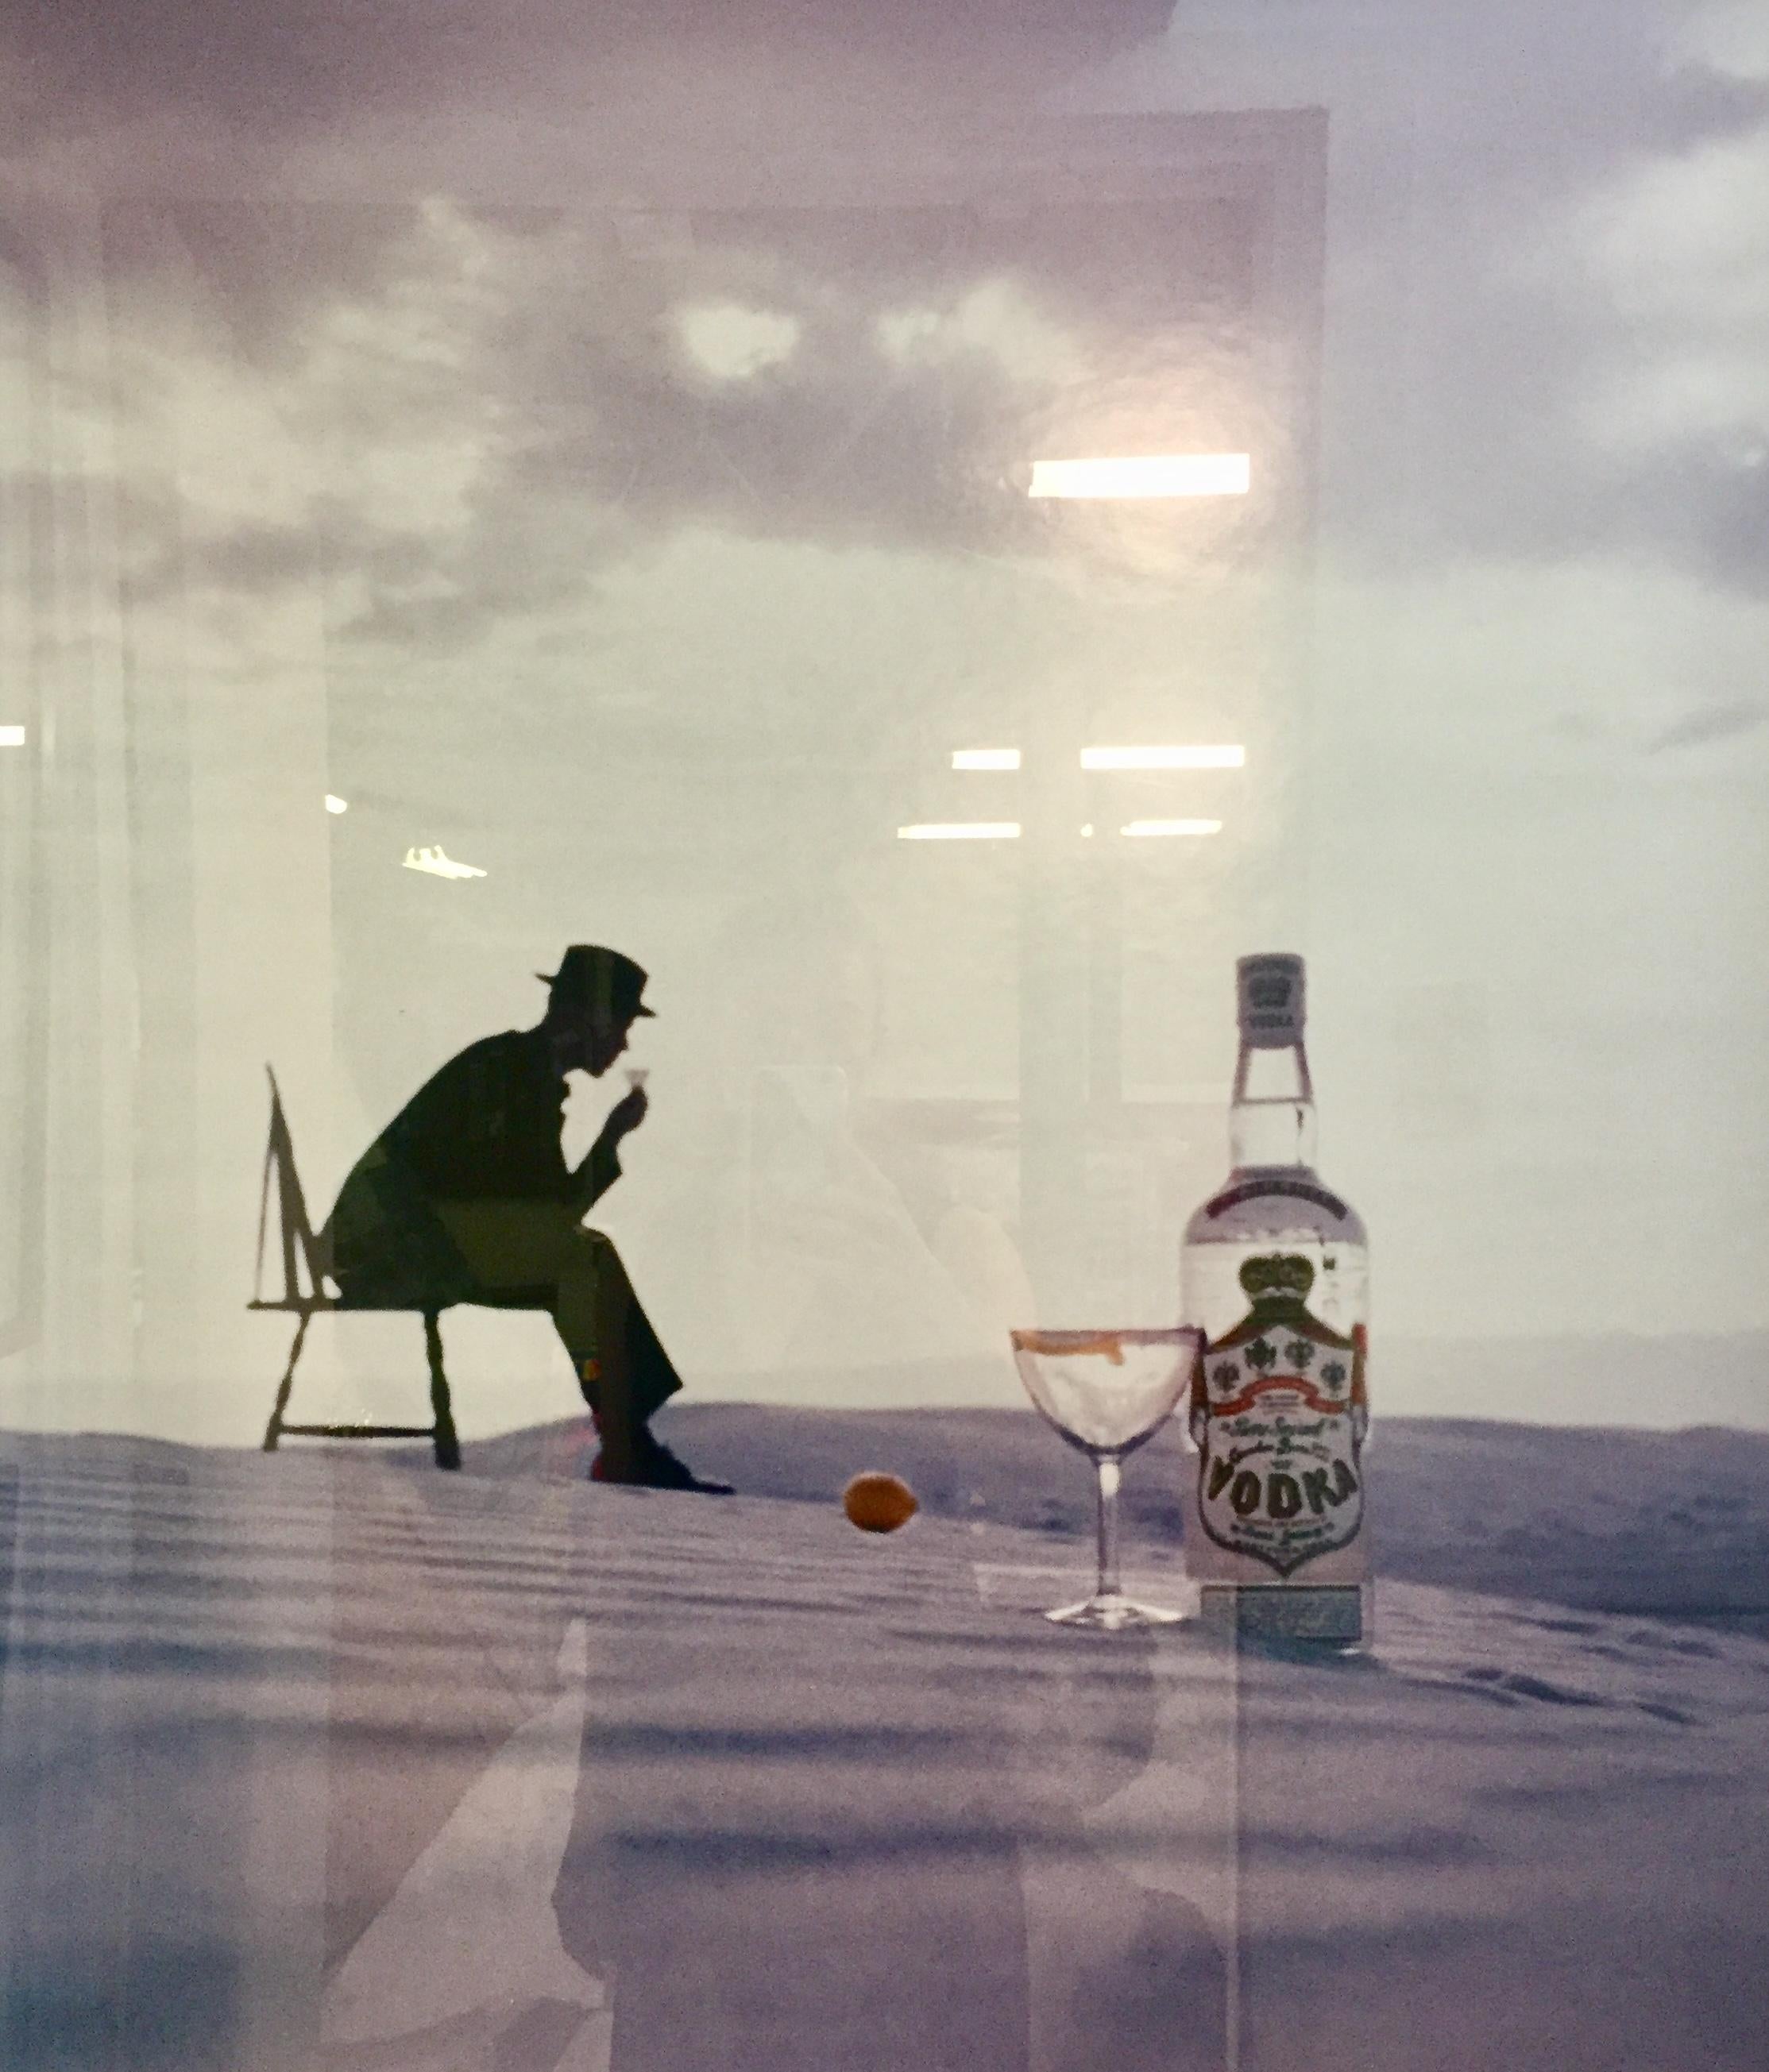 Bert Stern Abstract Photograph - Out of the Blue, White Sands, New Mexico, Smirnoff Vodka, 1953